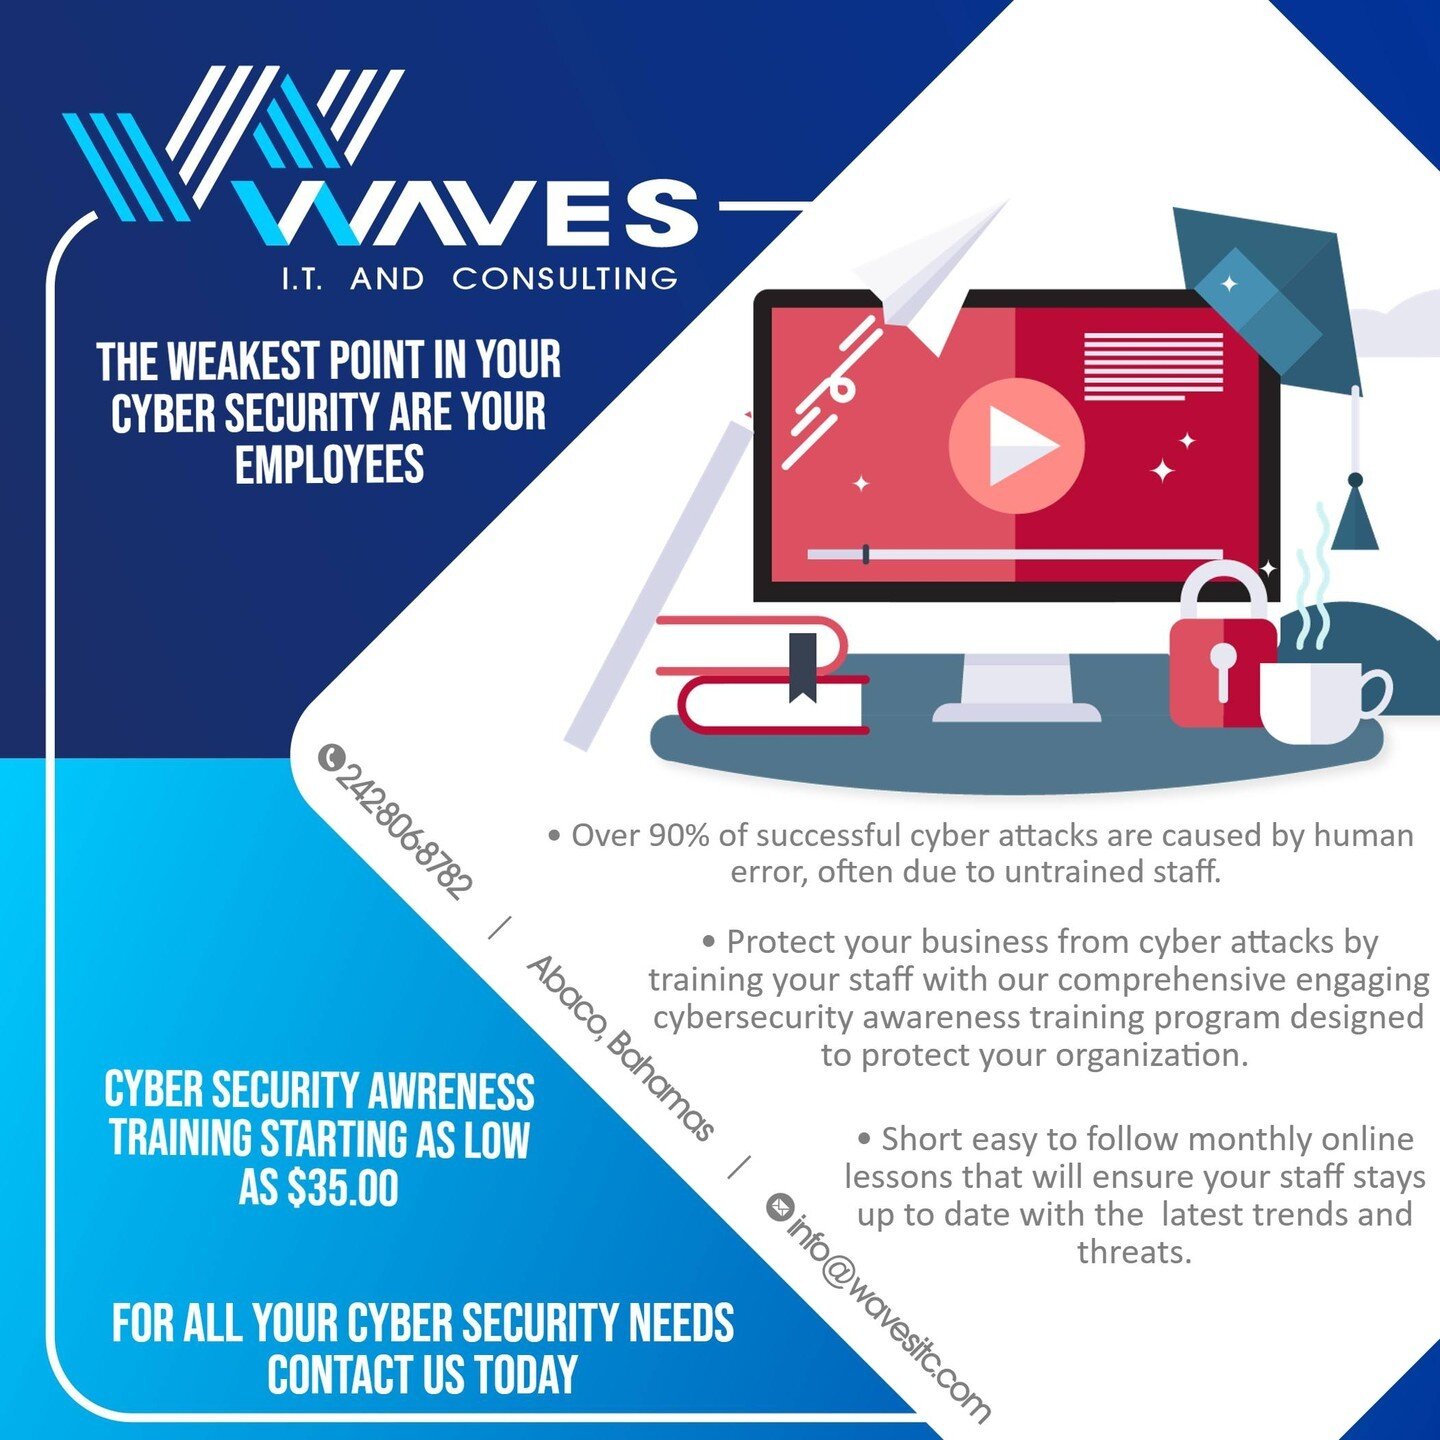 Protect your business from cyber attacks! Sign up for our Cyber Security Awareness Training and educate your team on best practices for online safety. Contact us today to schedule a training session! #CyberSecurity #OnlineSafety #ProtectYourBusiness 